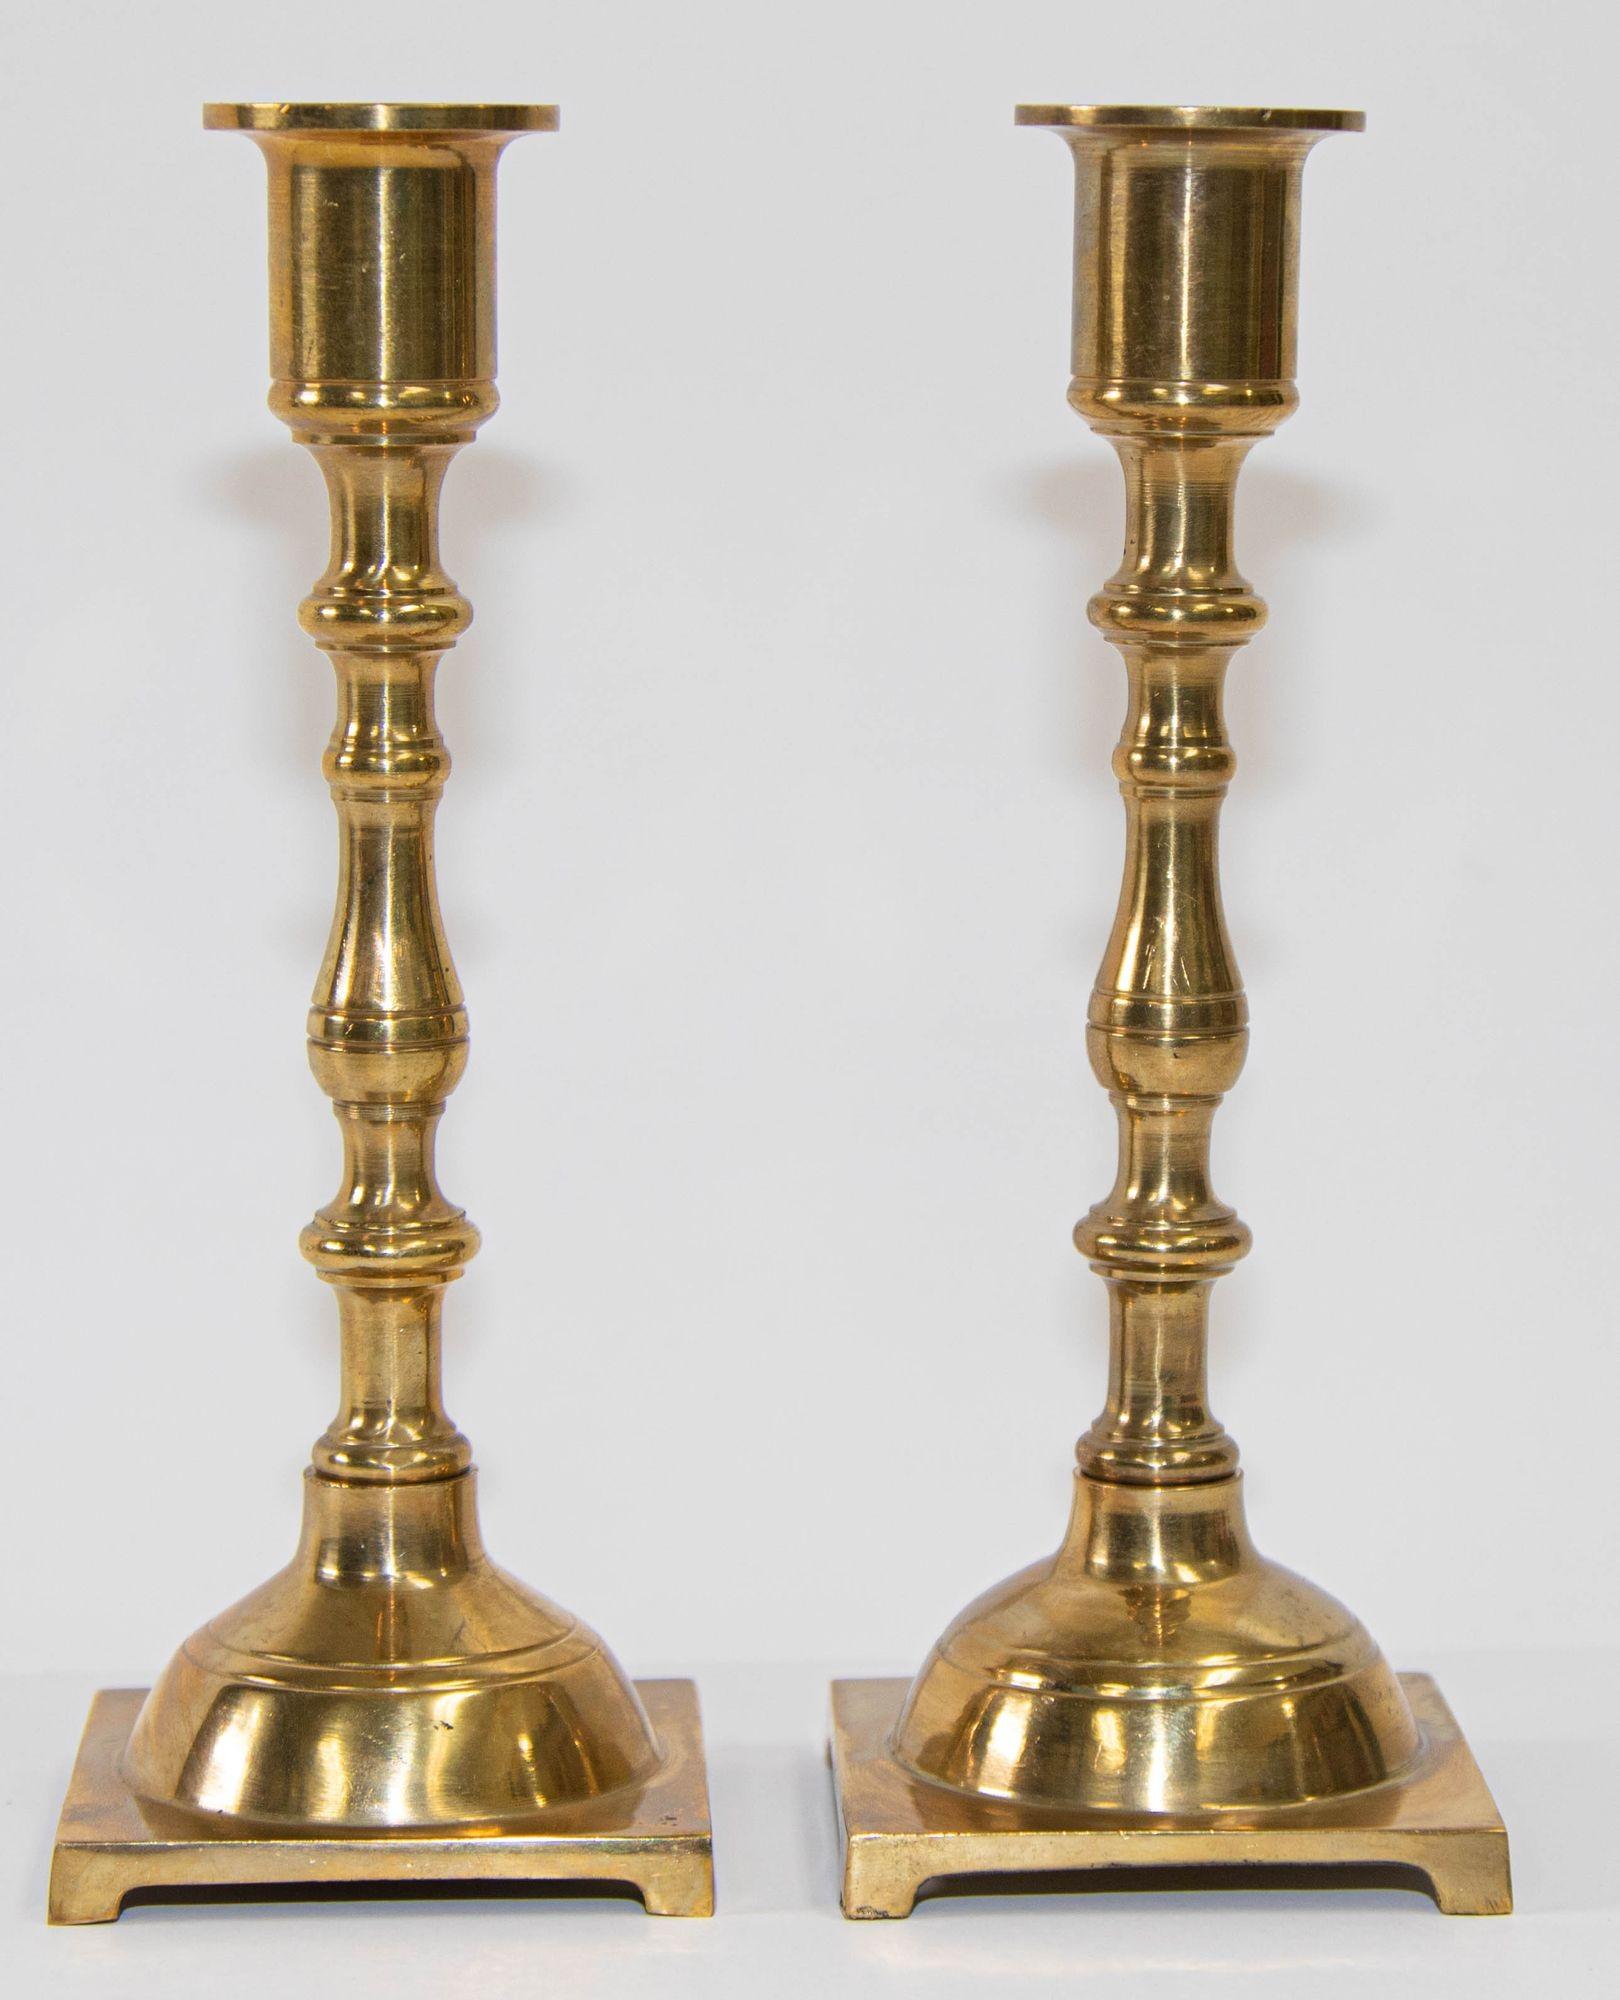 Pair of Georgian polished brass candlesticks having a shaped column raised on a square footed base.
Pair of Georgian Antique Brass Candlesticks A more unusual fine pair of English solid brass candle holder.
20th century Pair of English antique